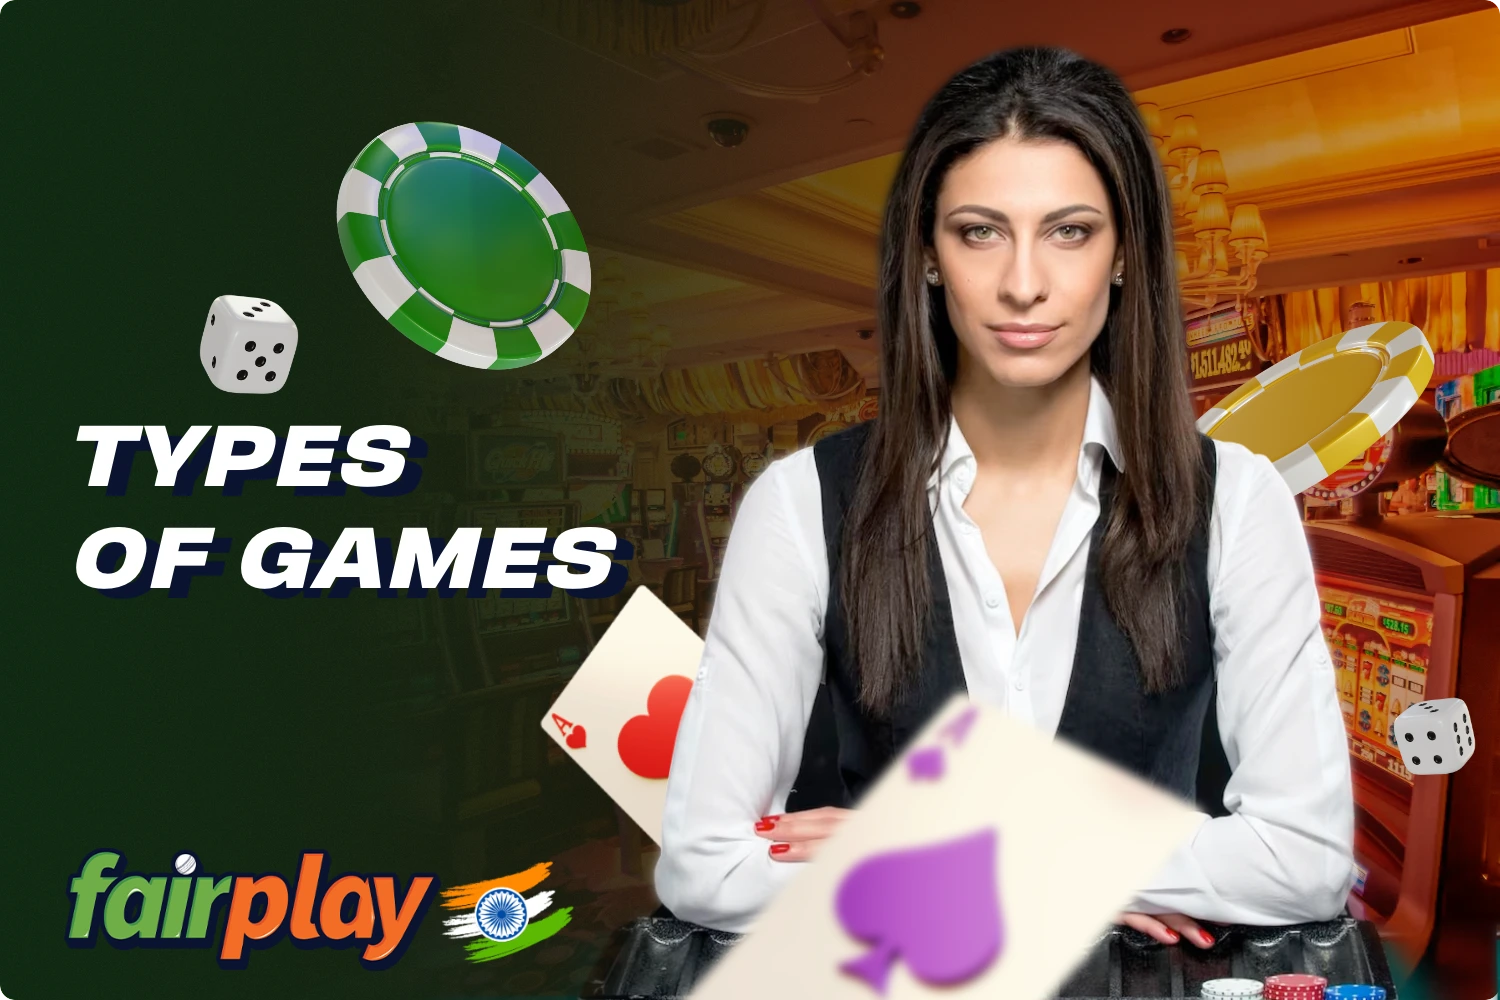 Indian users will find several types of games at Fairplay Casino